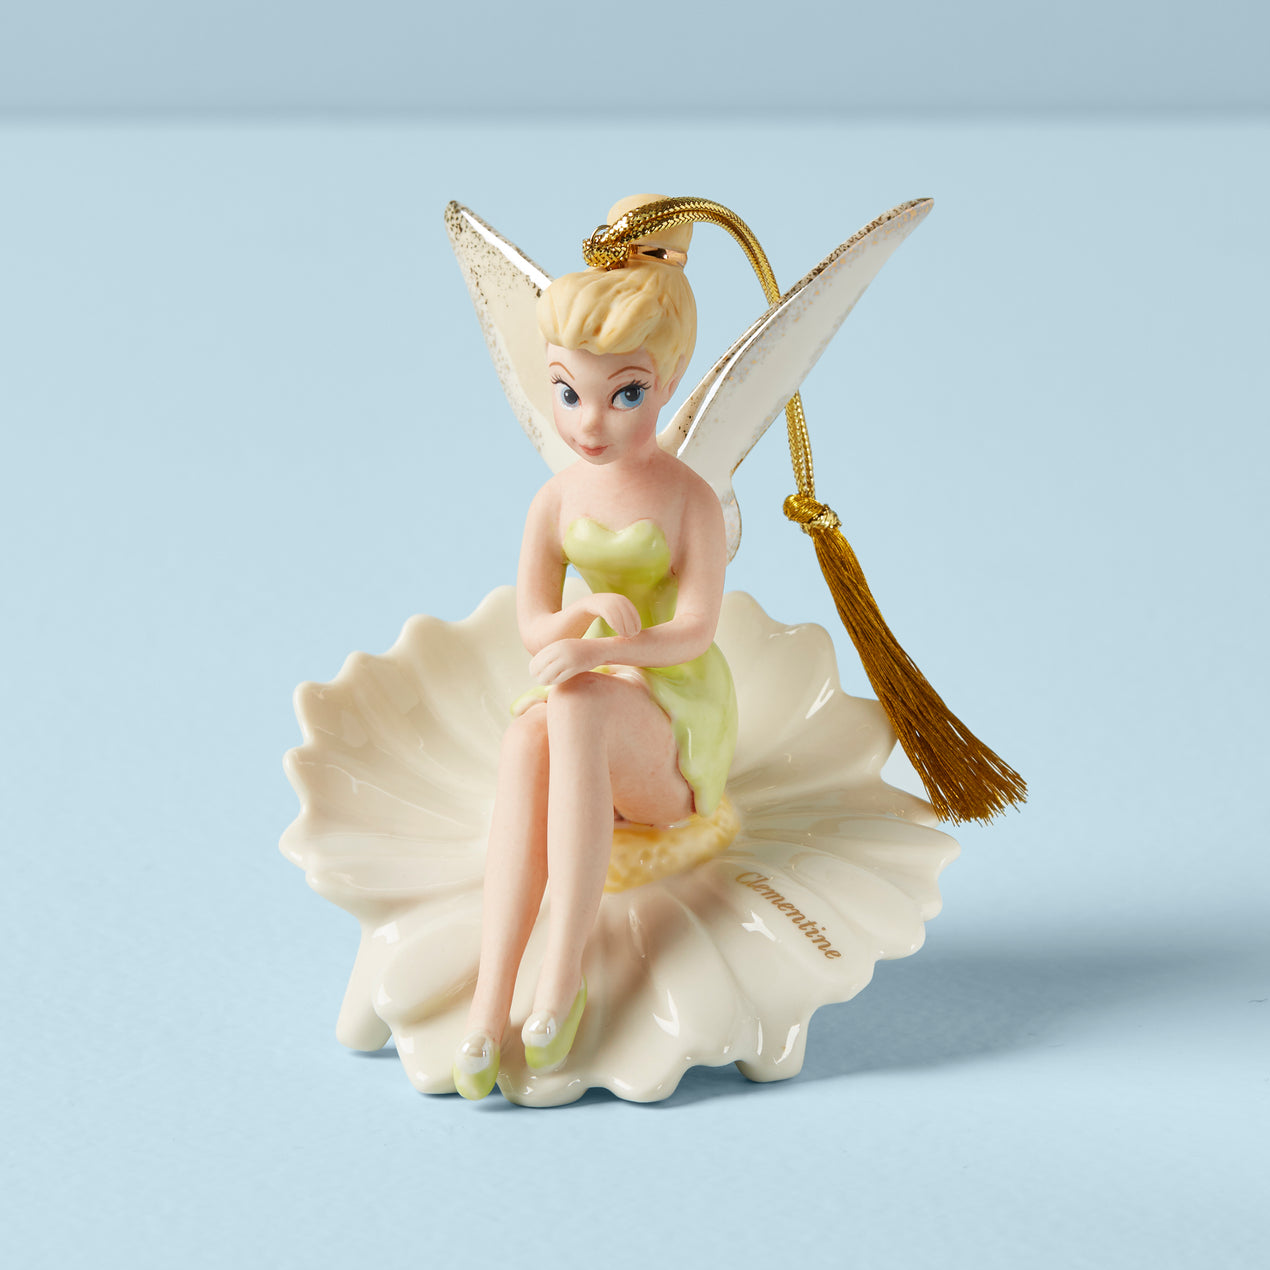 Personalized Tinker Bell Ornament – Lenox Corporation